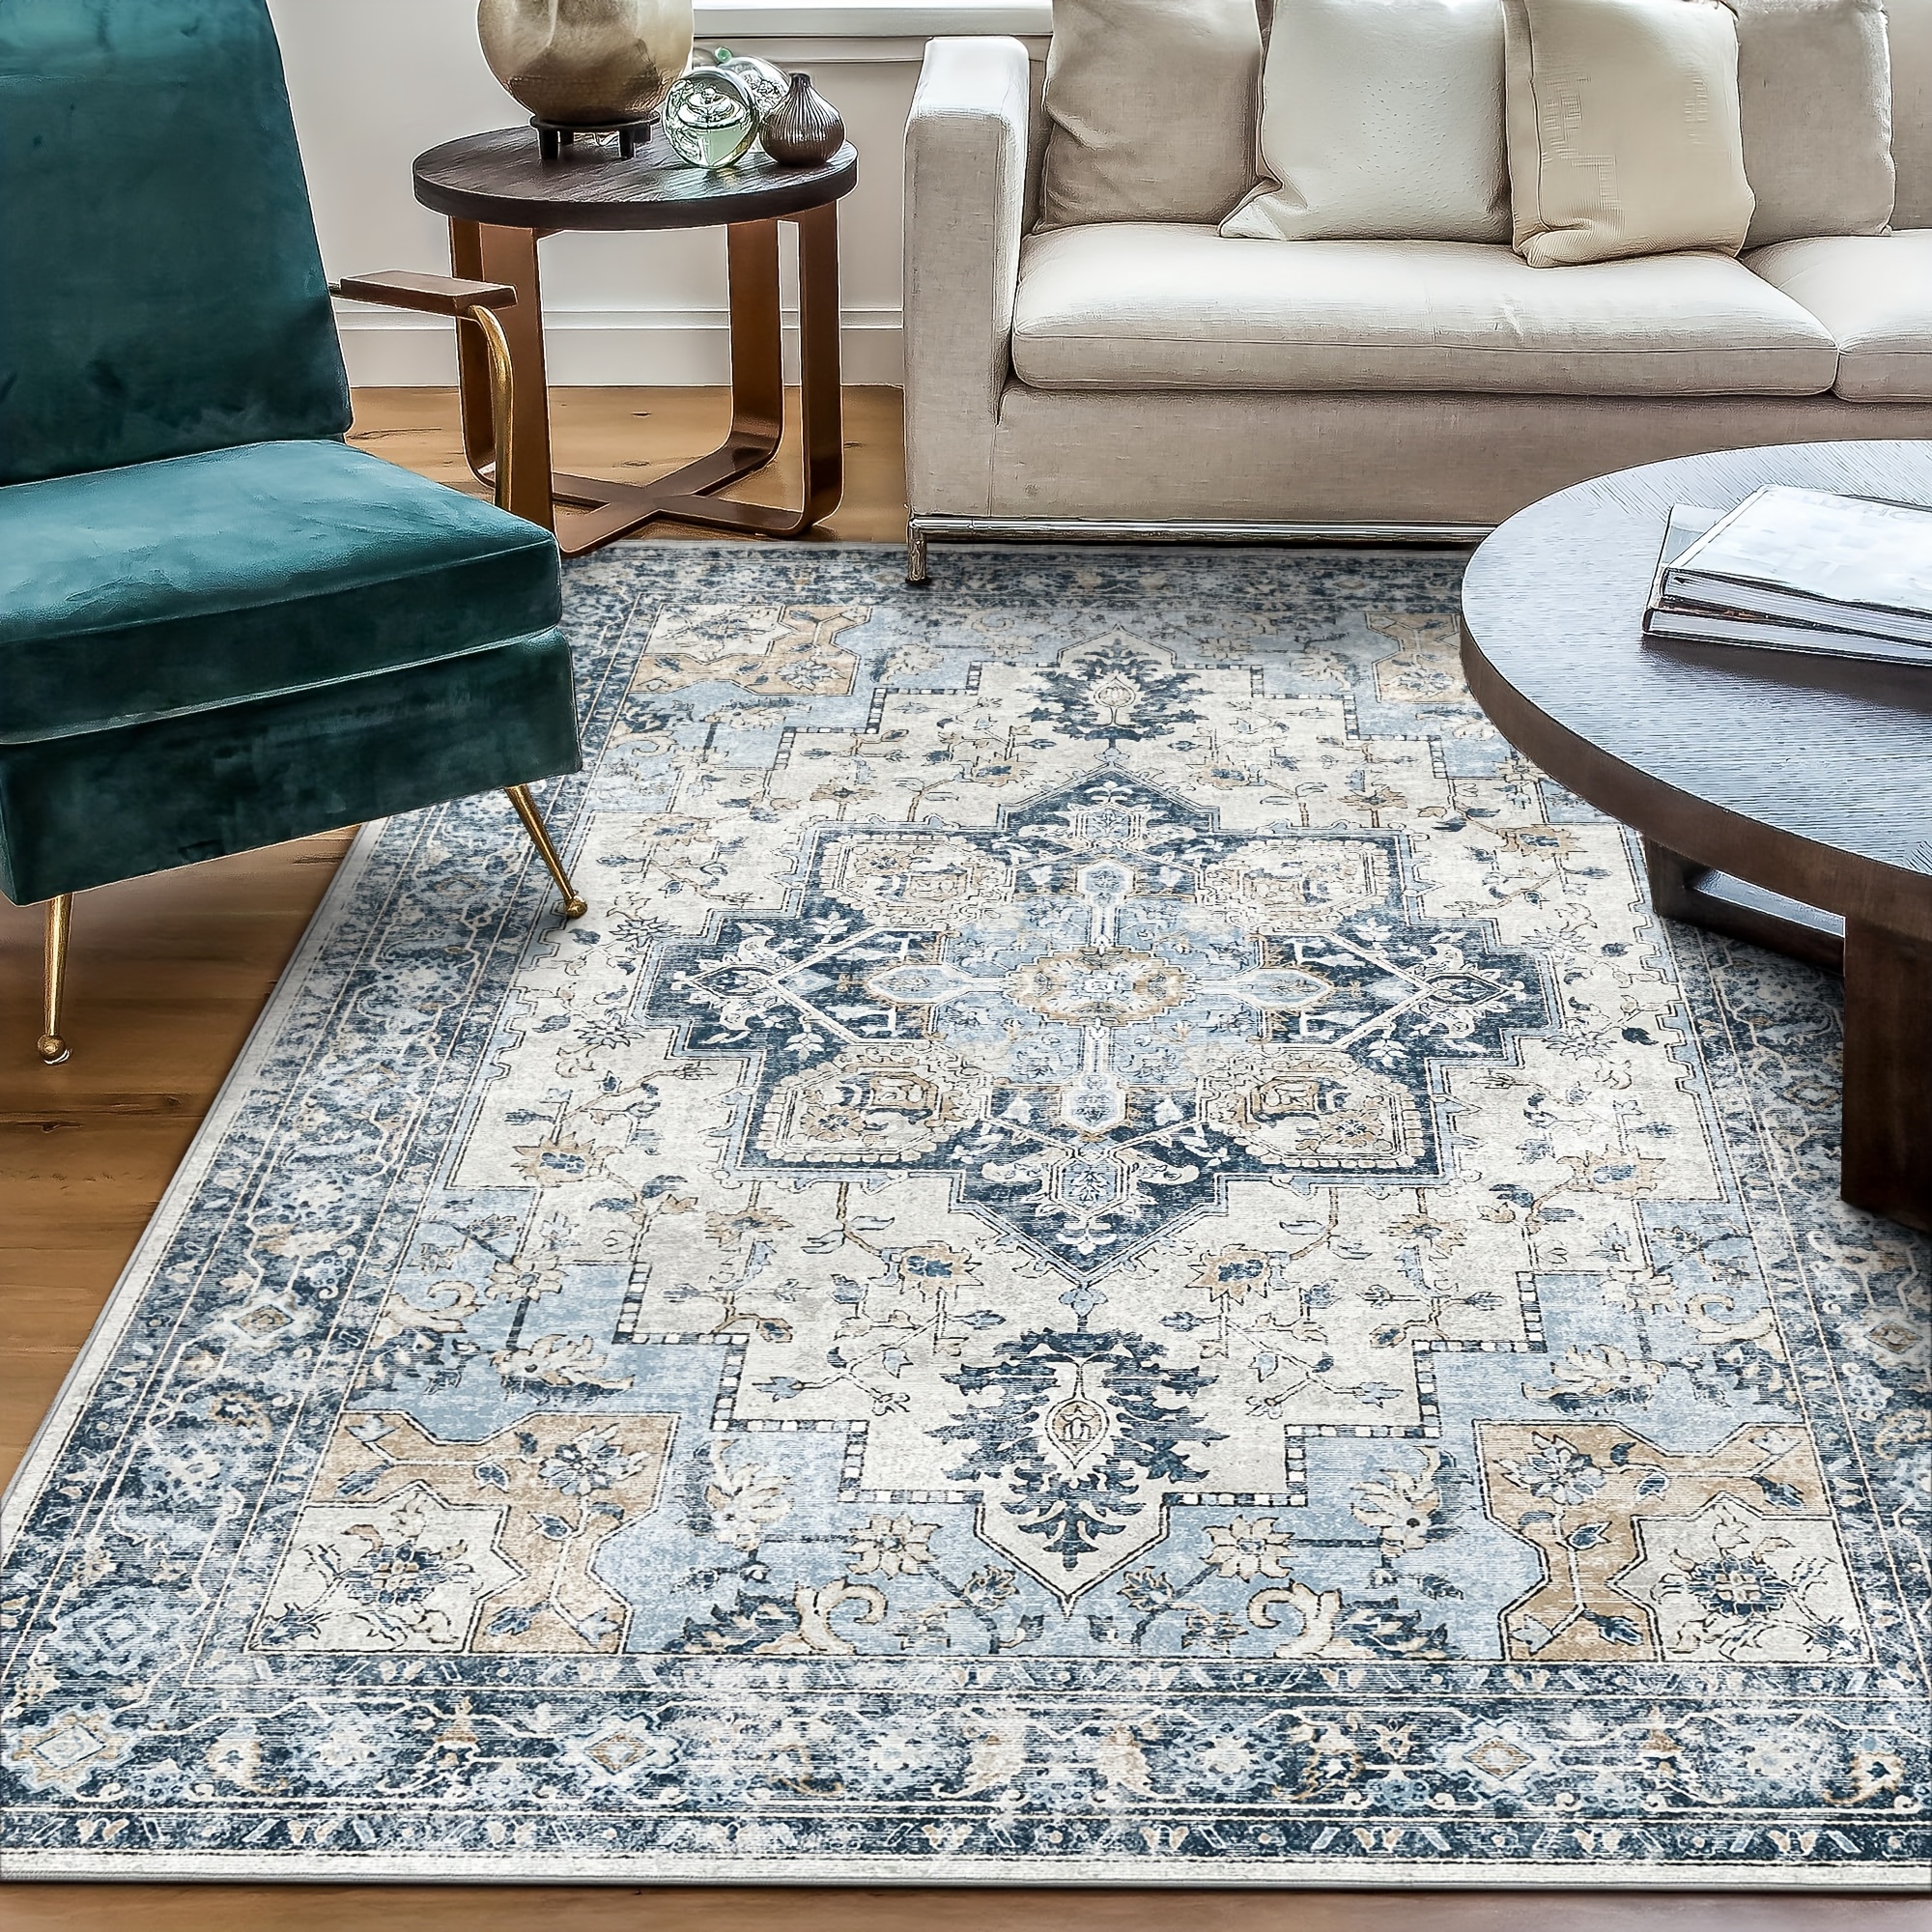 

Area Rugs For Living Room, Machine Washable Non Slip Vintage Retro Rugs, Low Pile Lightweigt Chenille Print Indoor Rug For Bedroom, Dining Room, Home Office, Blue